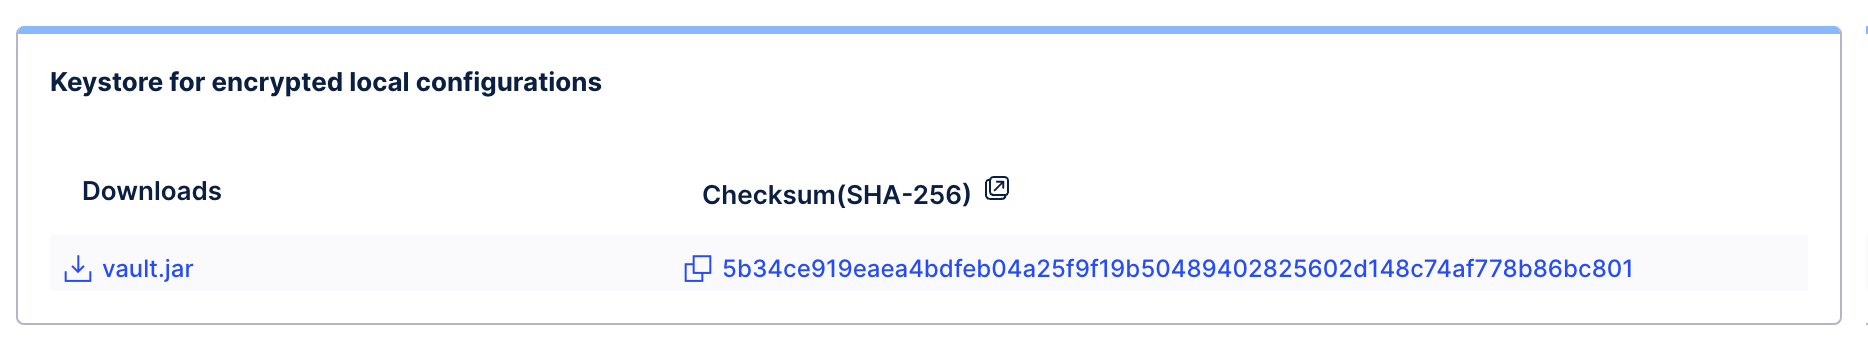 Each file from the Download Portal has SHA-256 checksums to verify its authenticity. The checksum appears next to the filename here.